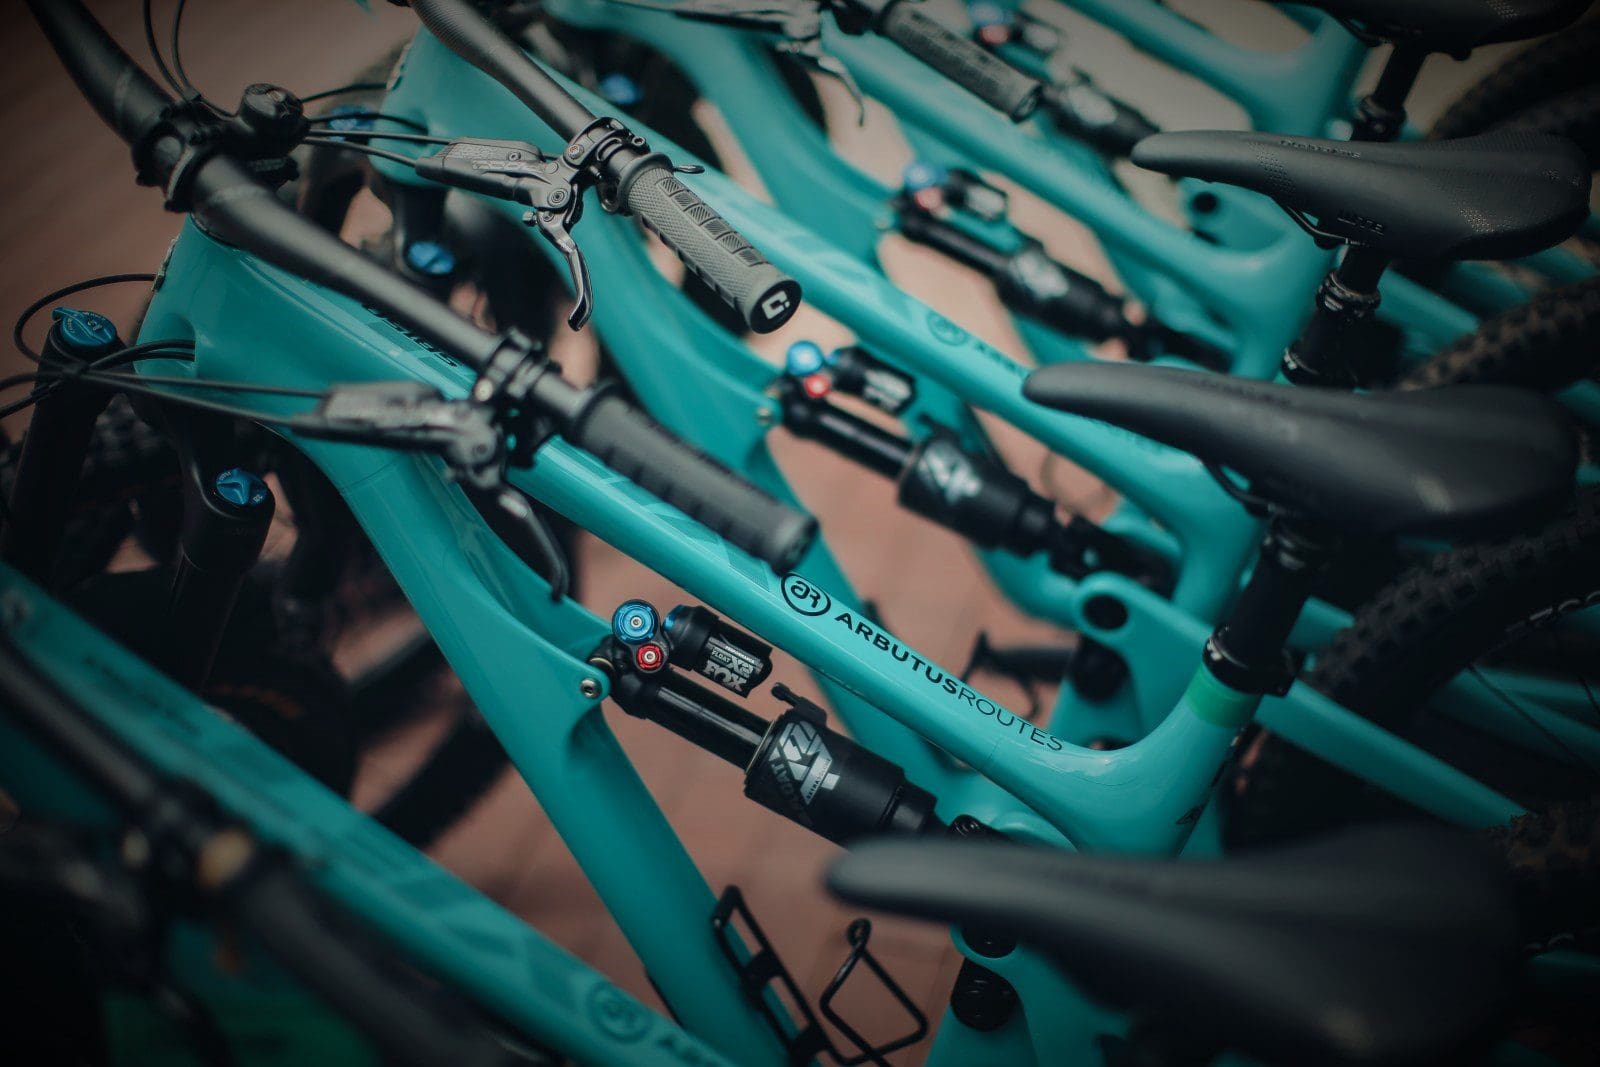 Our fleet of Whistler Bike Rentals including new models from Yeti Cycles.